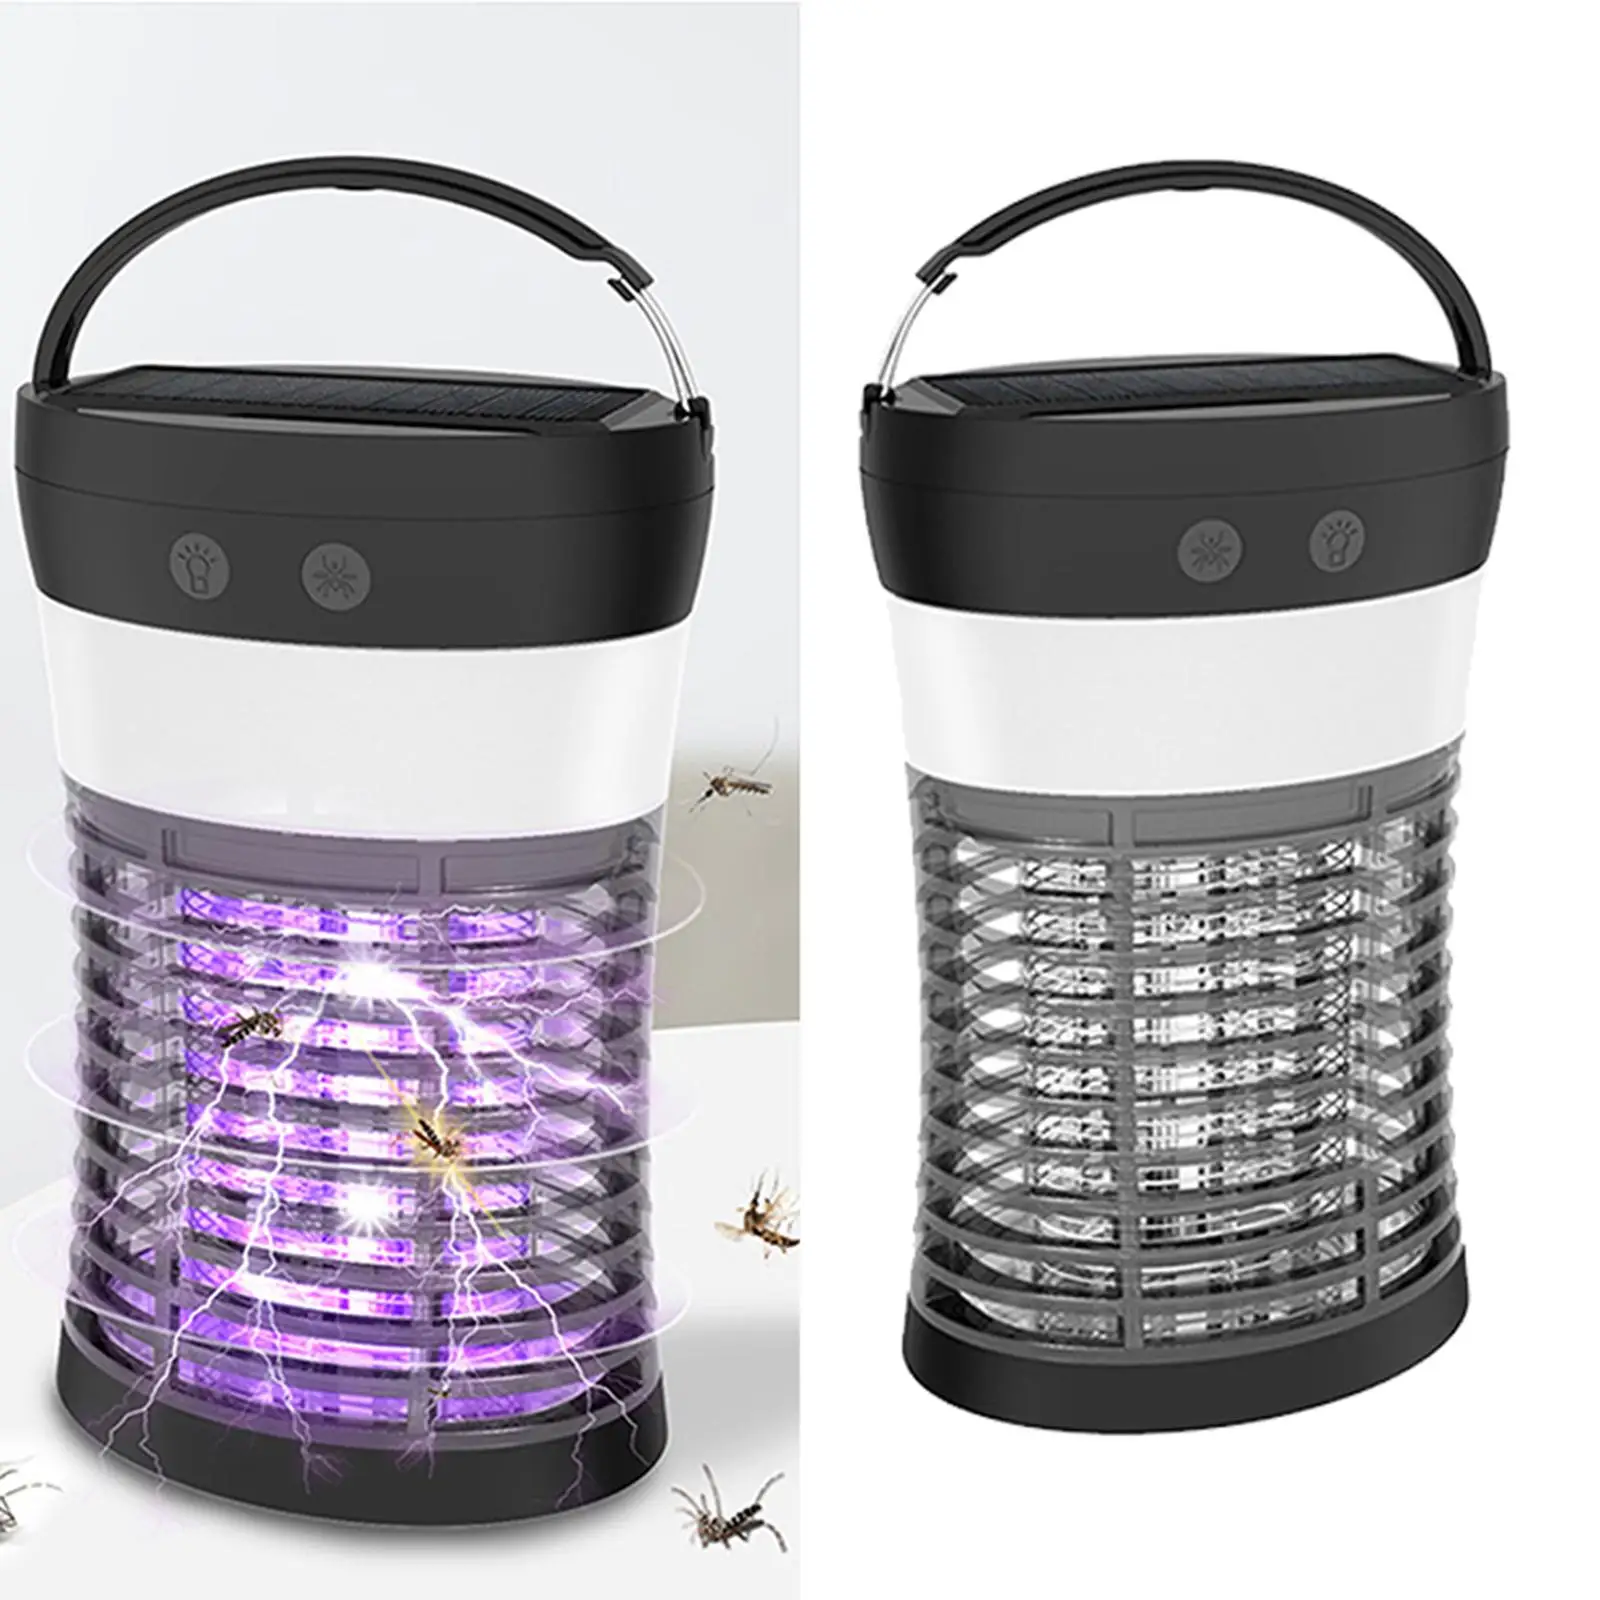 2 in1 LED USB Solar Power Mosquito Killer Lamp Protable Lantern Outdoor Repellent Light Insect Bug Mosquito Trap Camping Lights